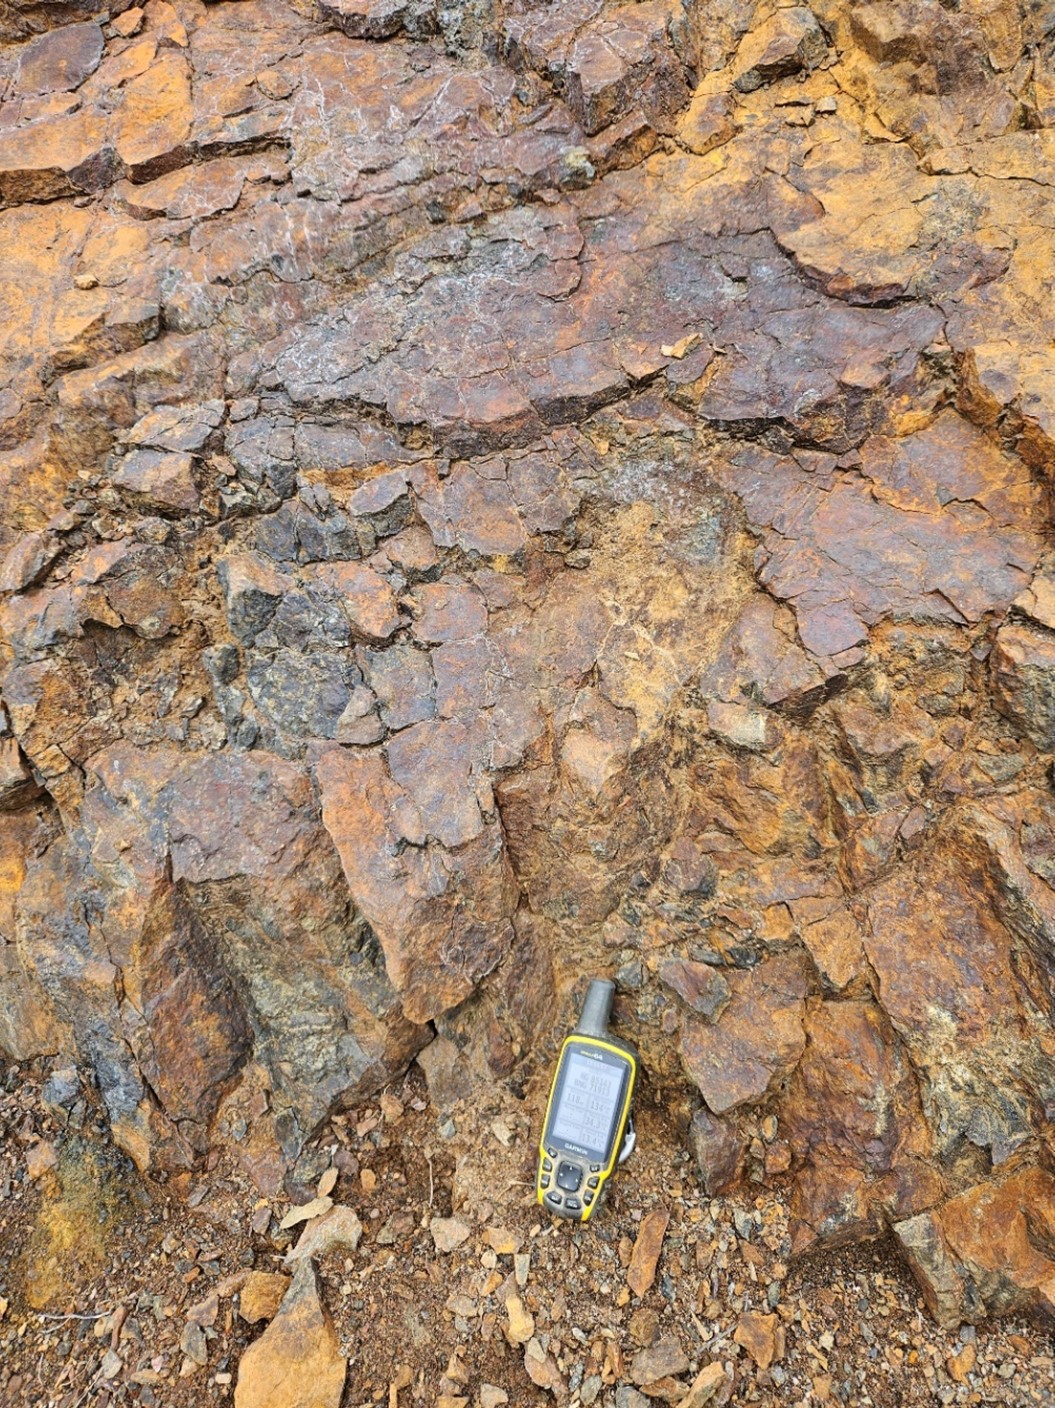 Newly exposed sulphide outcrop grading 0.91 g/t gold.